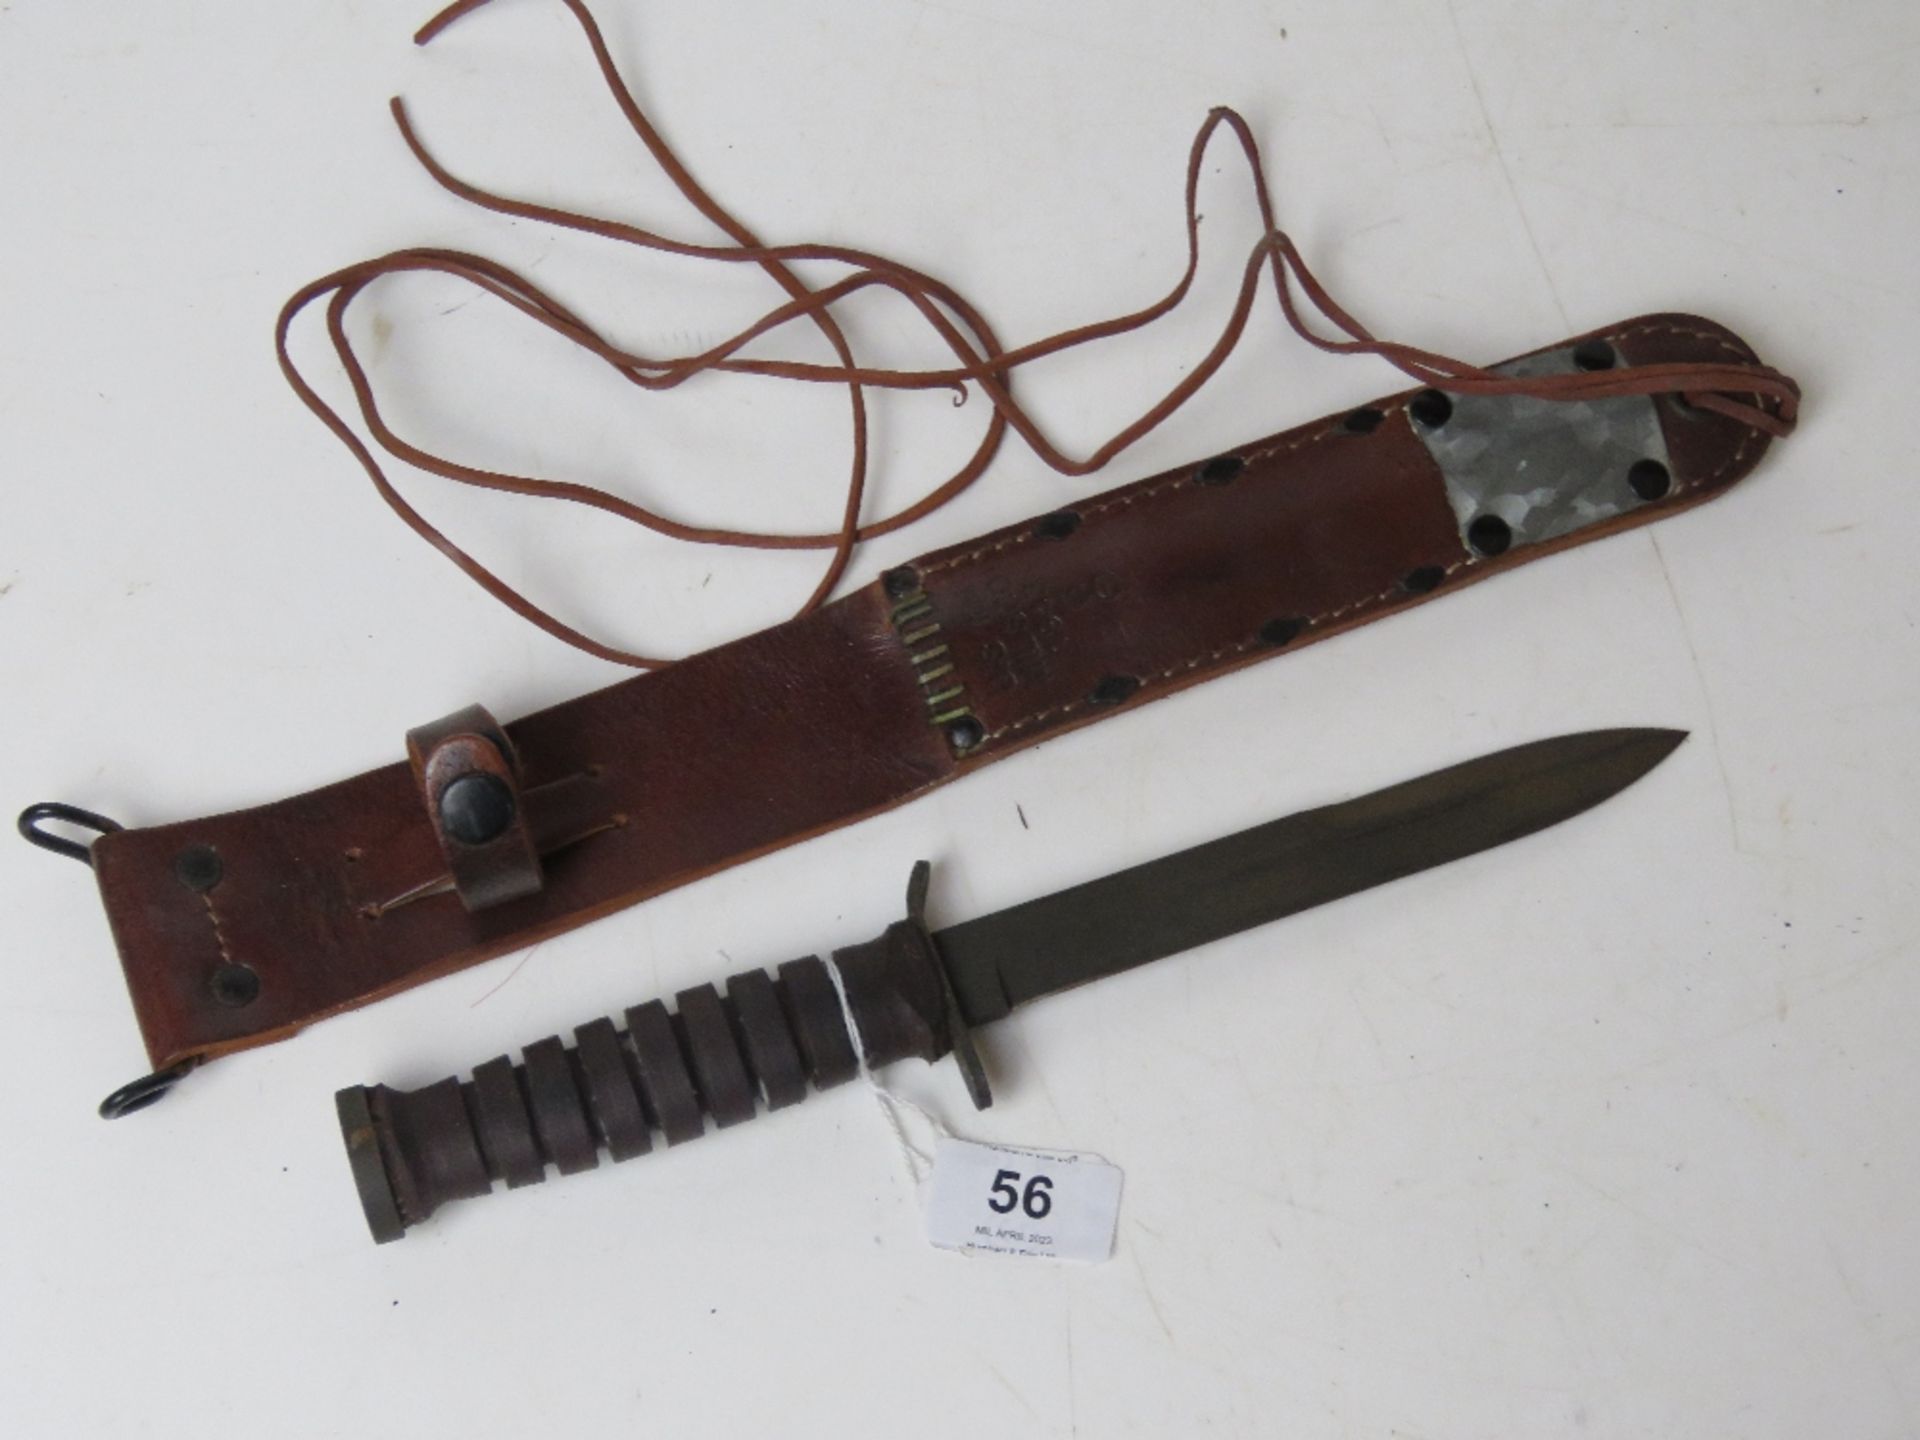 A reproduction M6 fighting knife with scabbard, dated 43 on the scabbard.